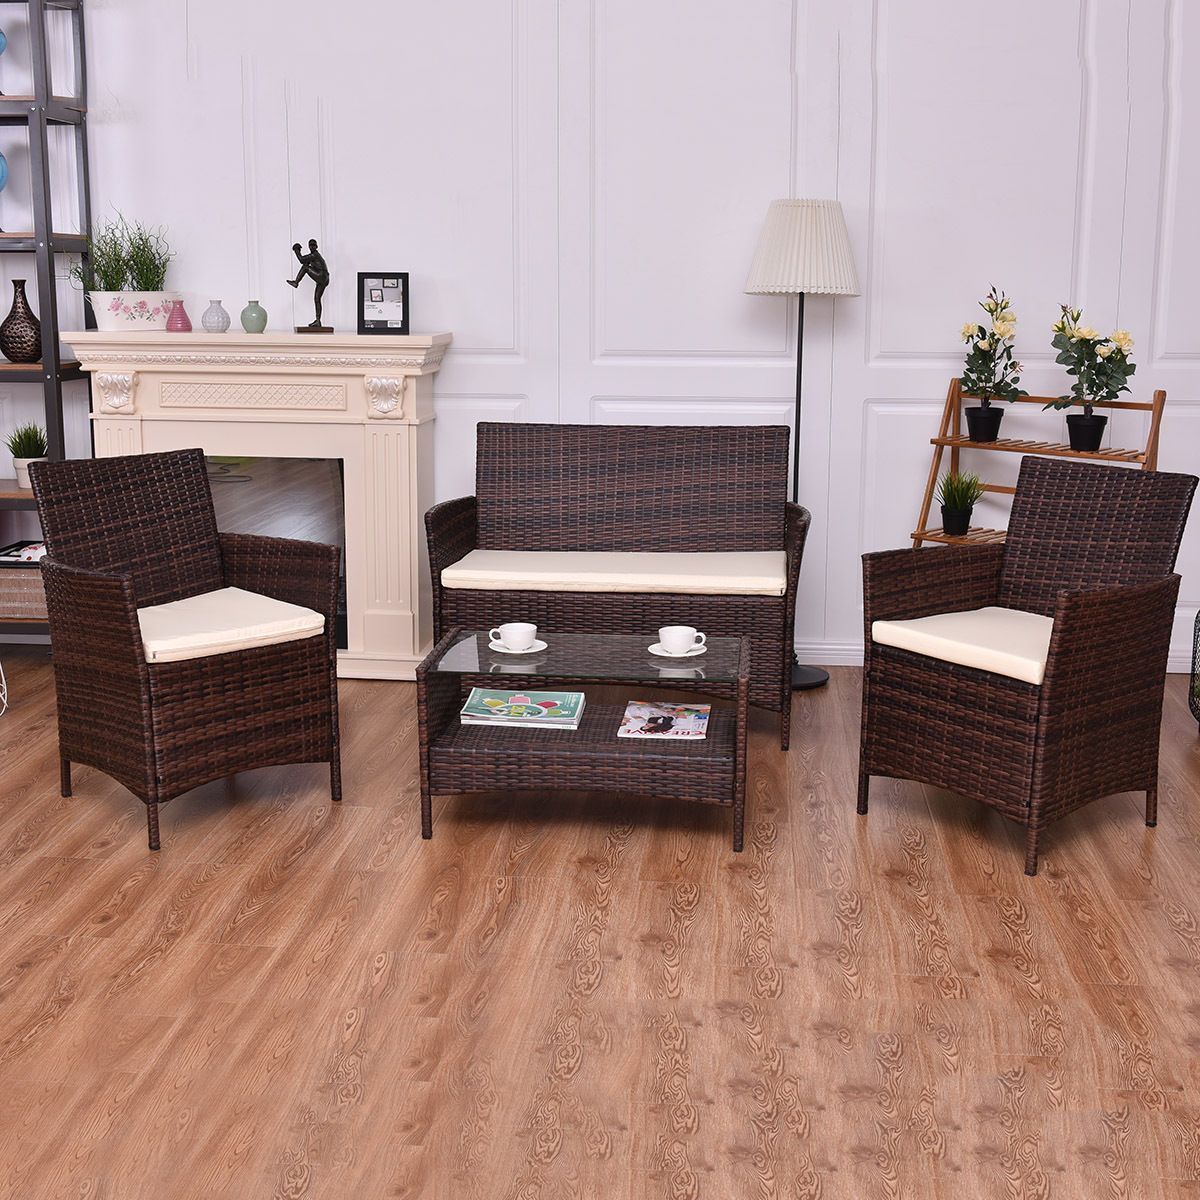 Declan - 4 Piece Patio Rattan Furniture - Nordic Side - 07-03, feed-cl0-over-80-dollars, furniture-tag